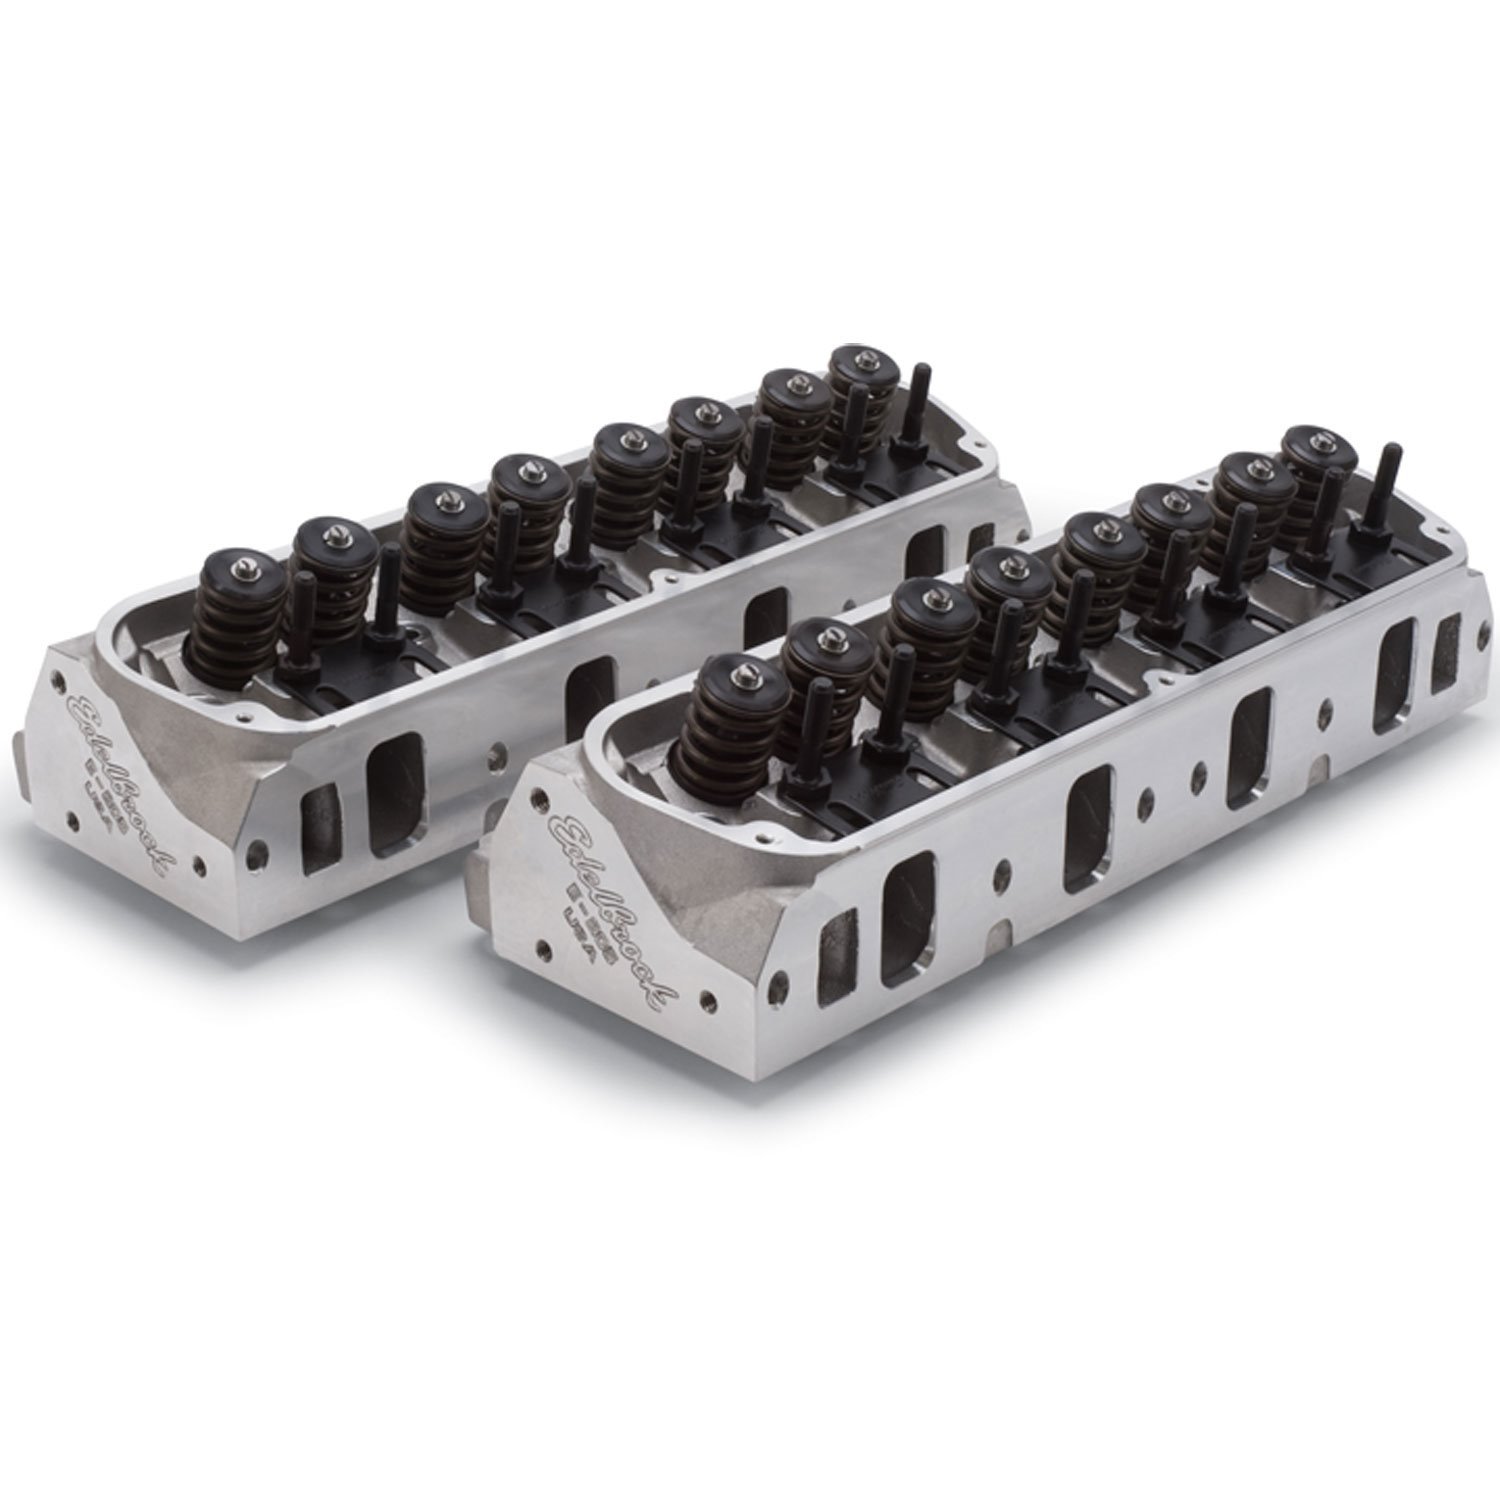 E-Series E-205 Cylinder Heads for Small Block Ford